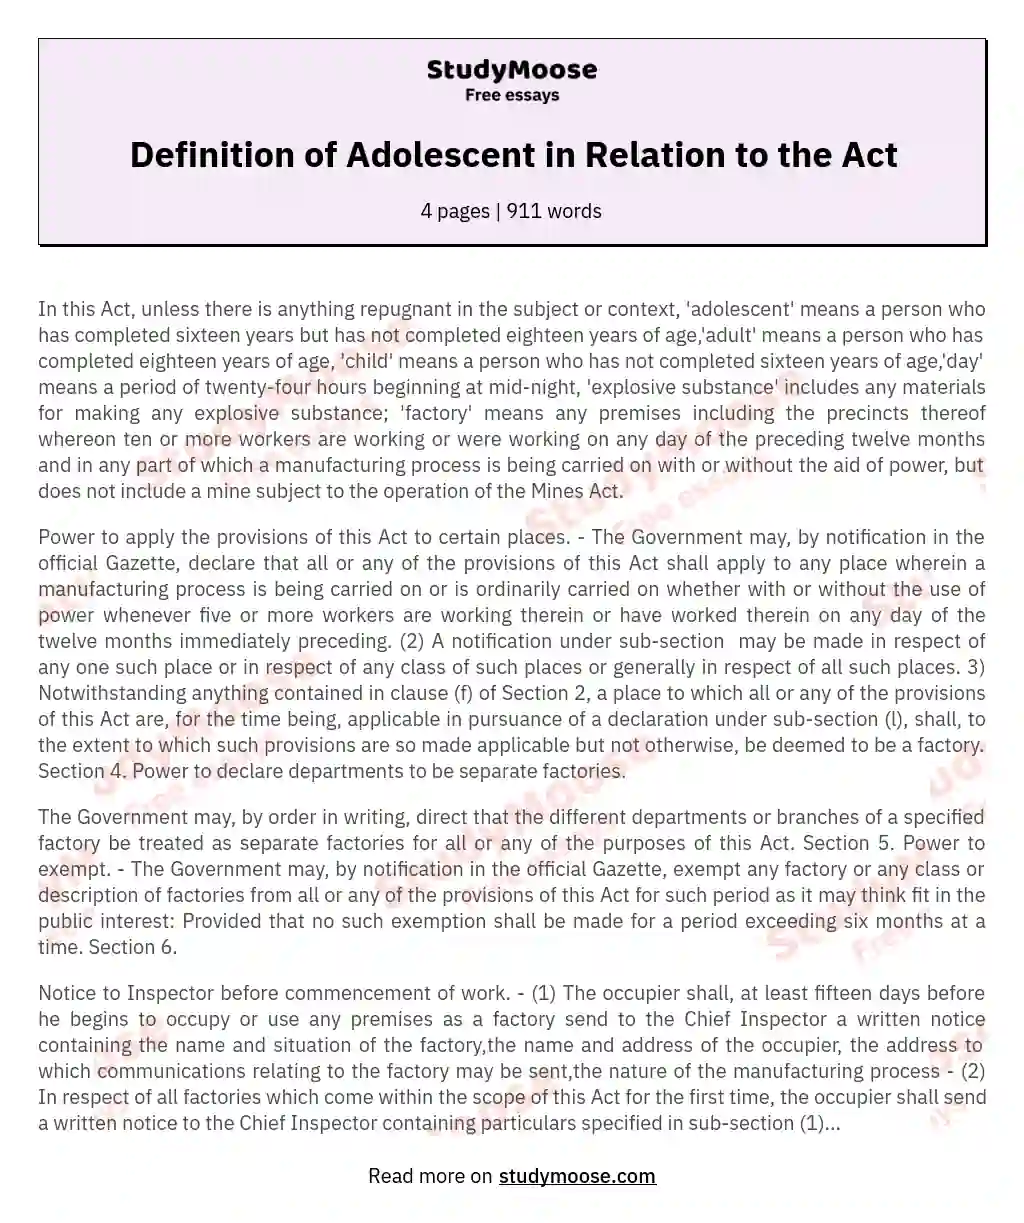 Definition of Adolescent in Relation to the Act essay